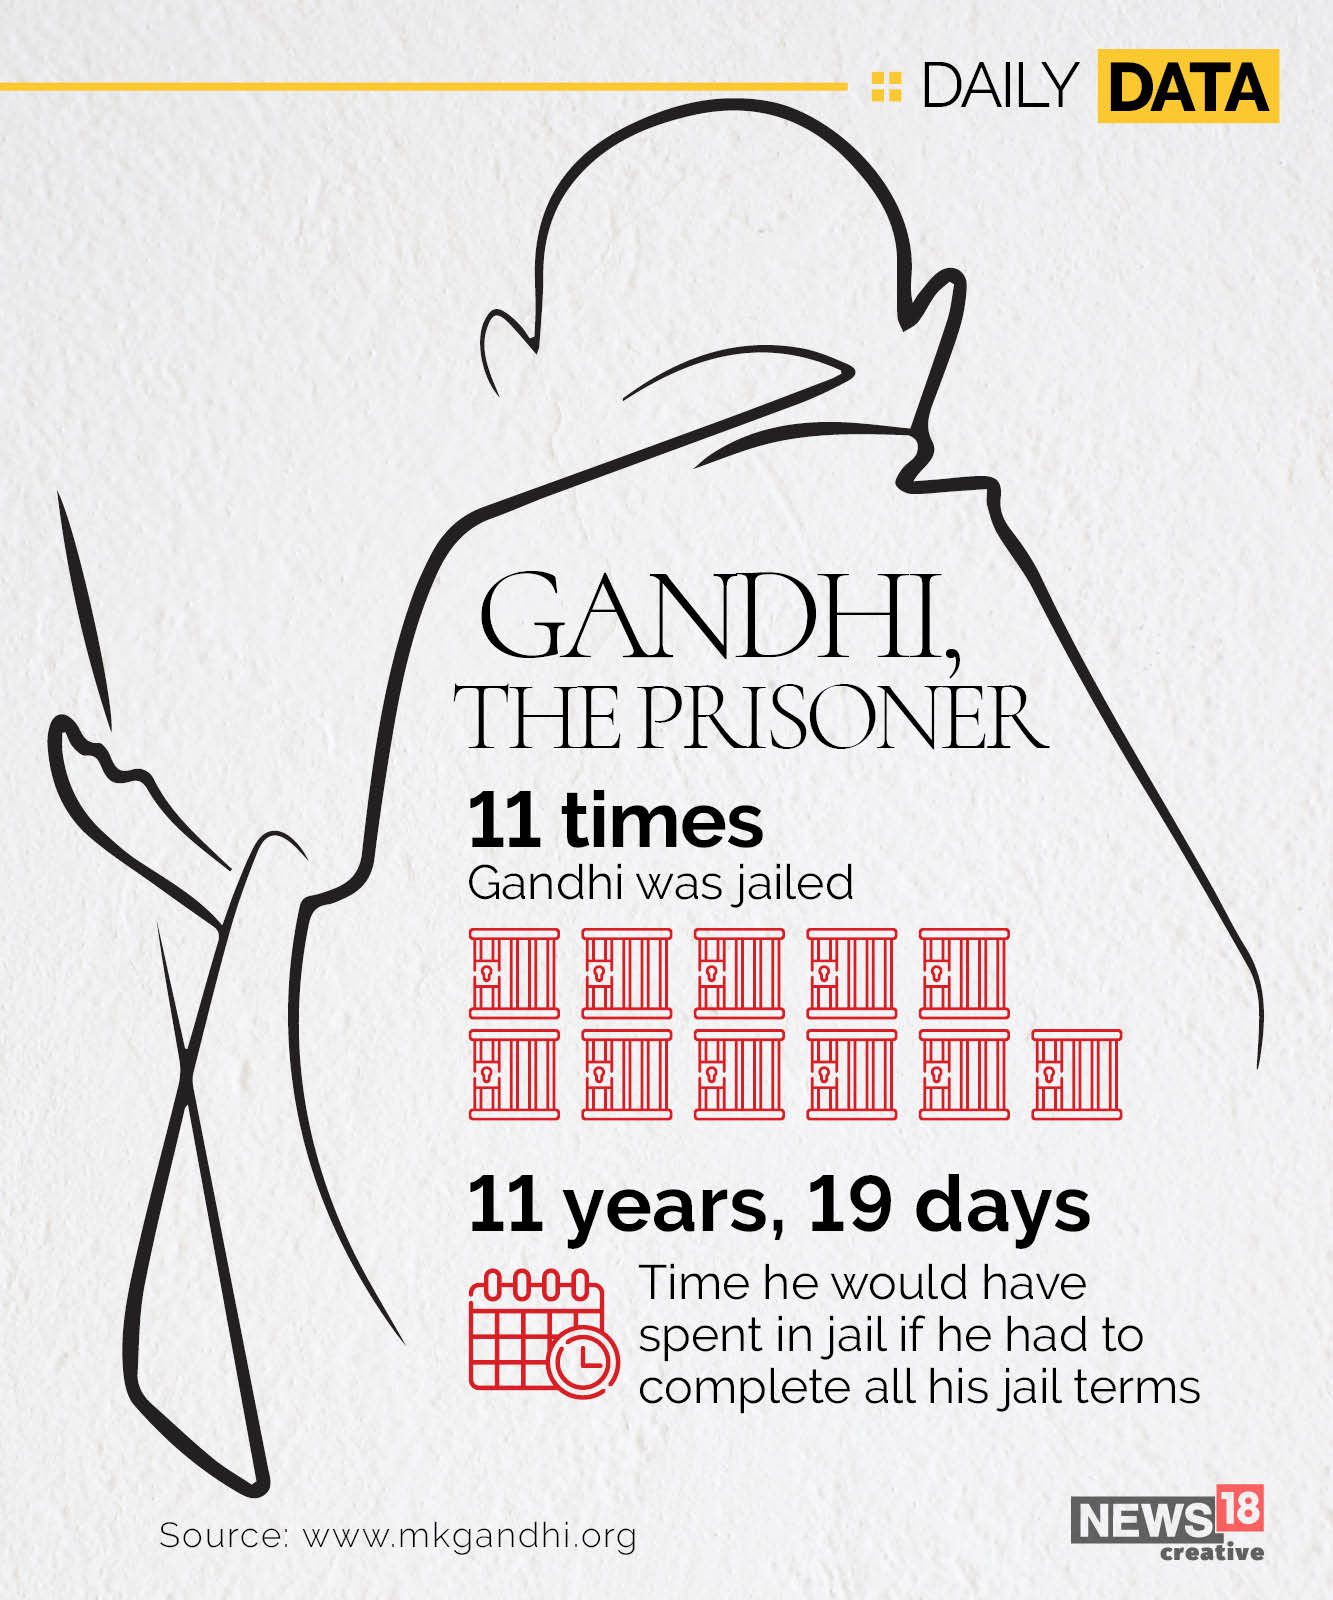 If Mahatma Gandhi had served all his jail terms...